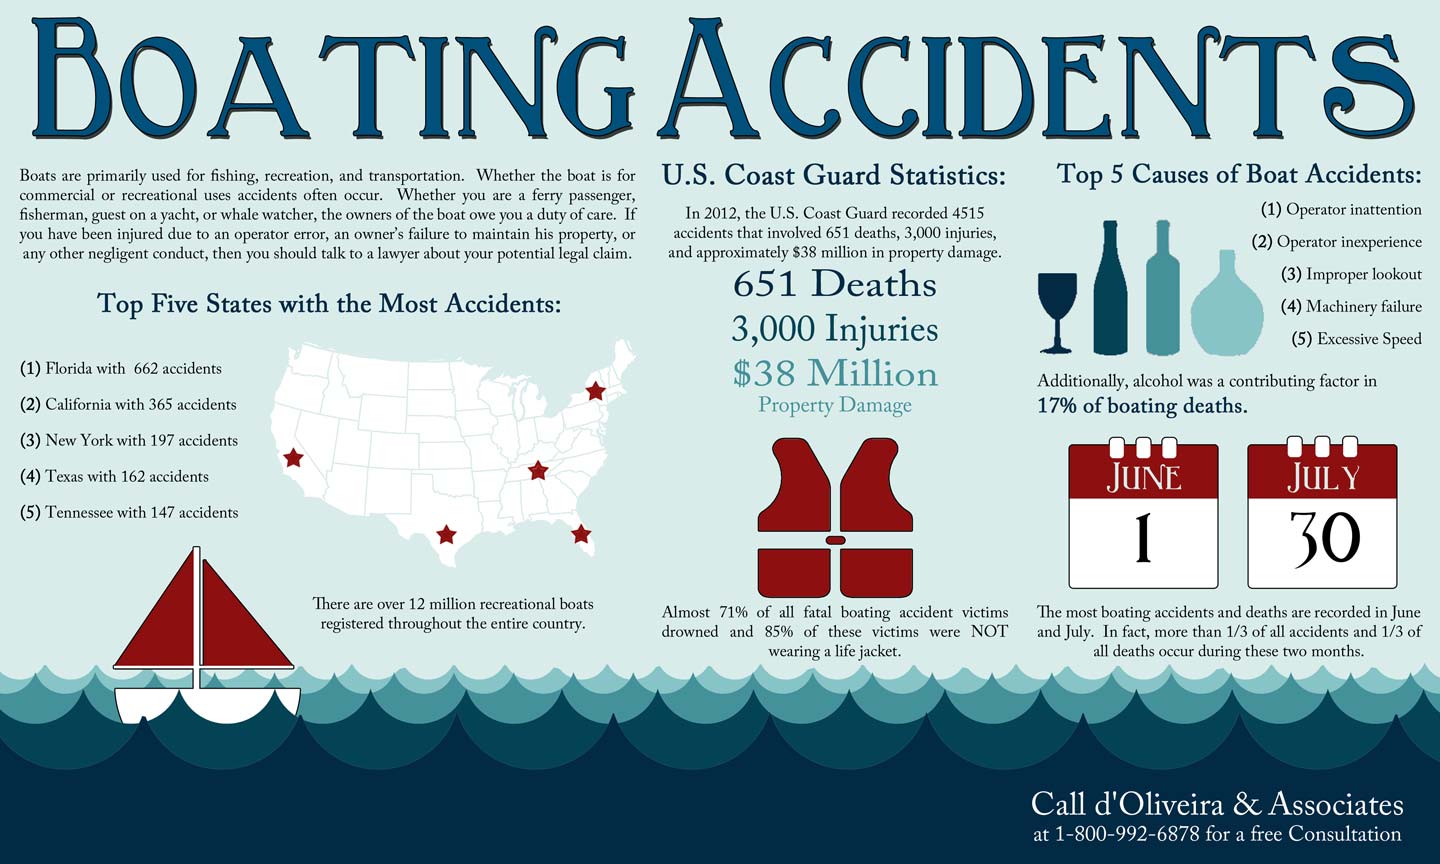 Statistics and Causes of Boating Accidents Infographic